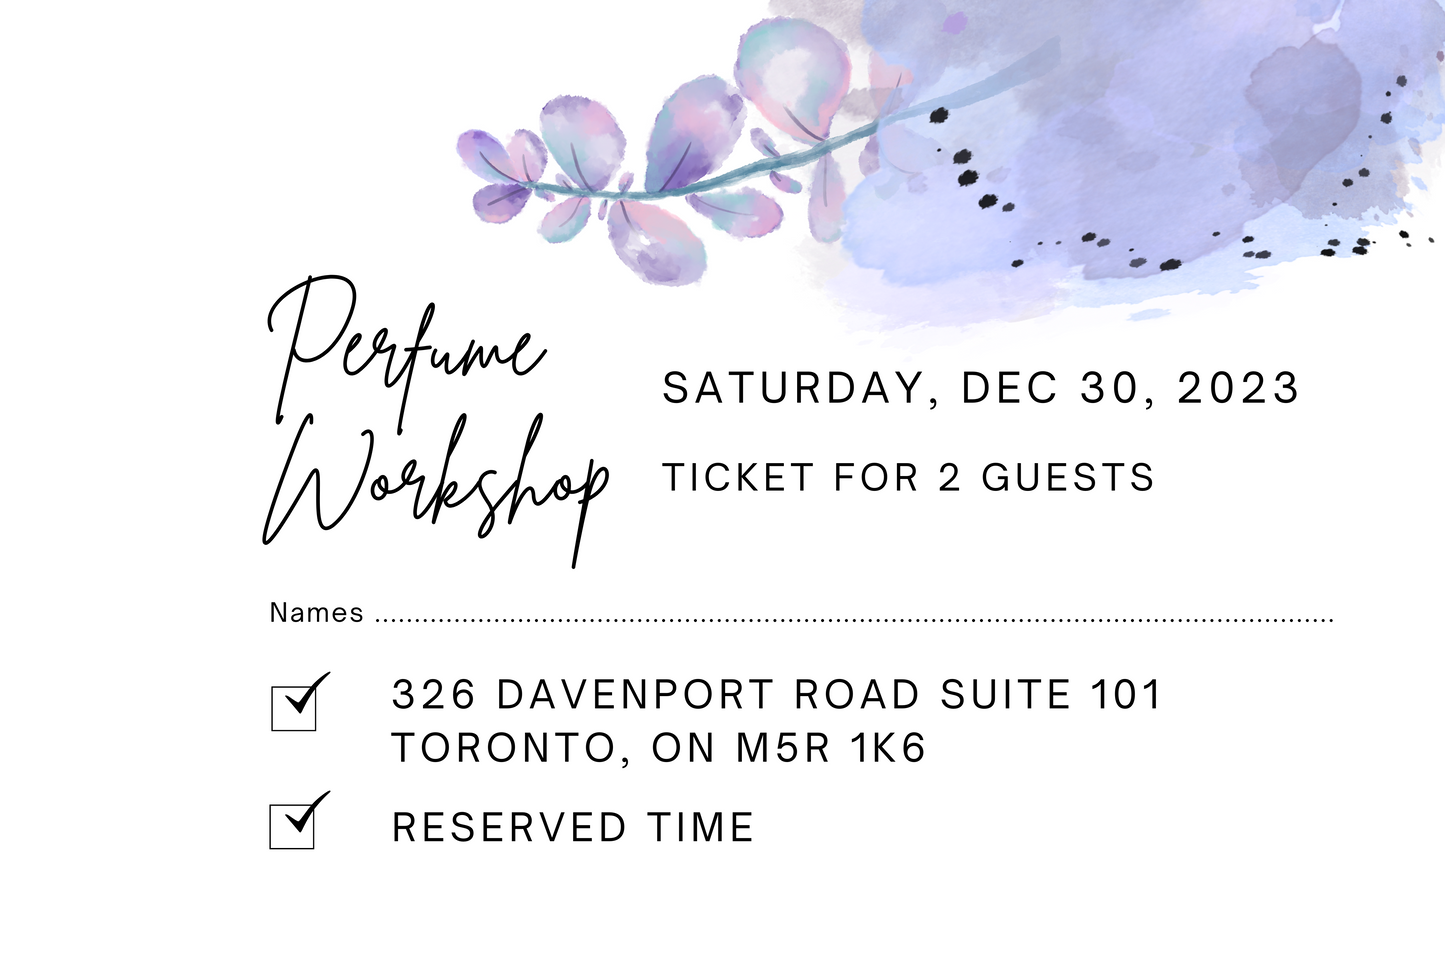 December 30th, 2023 Perfume/Cologne Workshop Session For 2 Guests